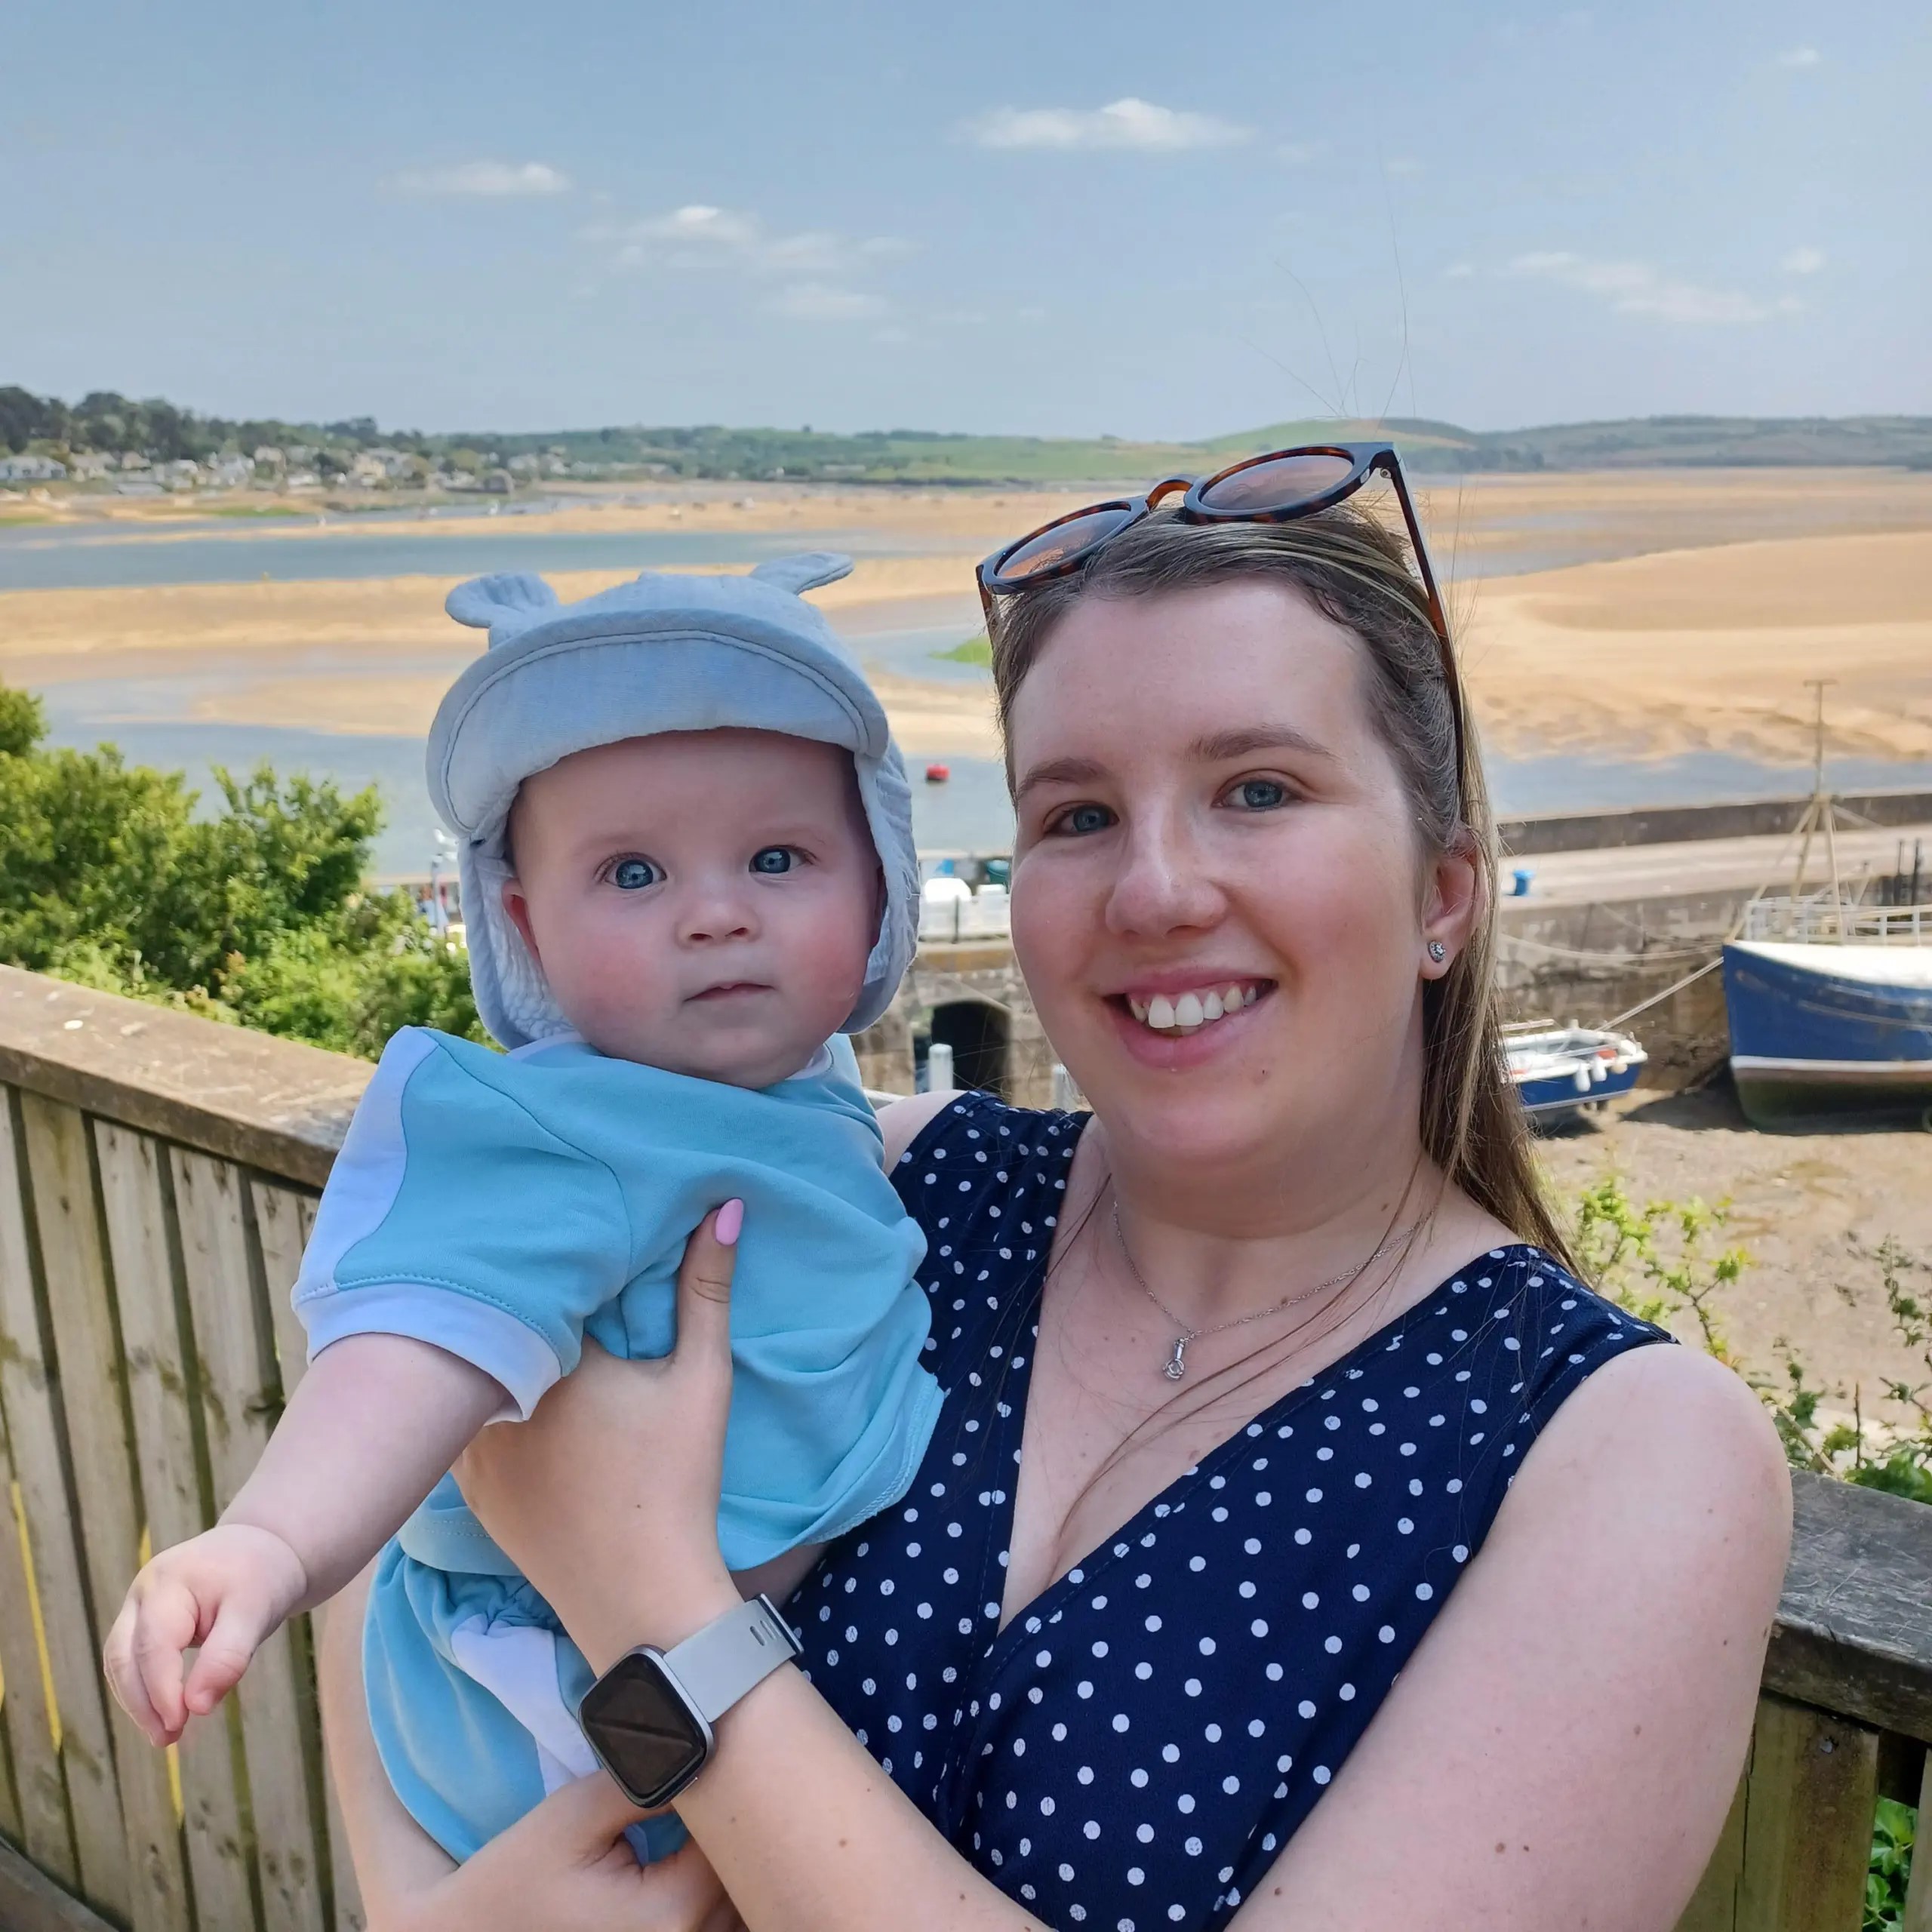 Emma is wearing a blue and white summer dress, holding her child in her arms. They have the beach in the background and are smiling at the camera.